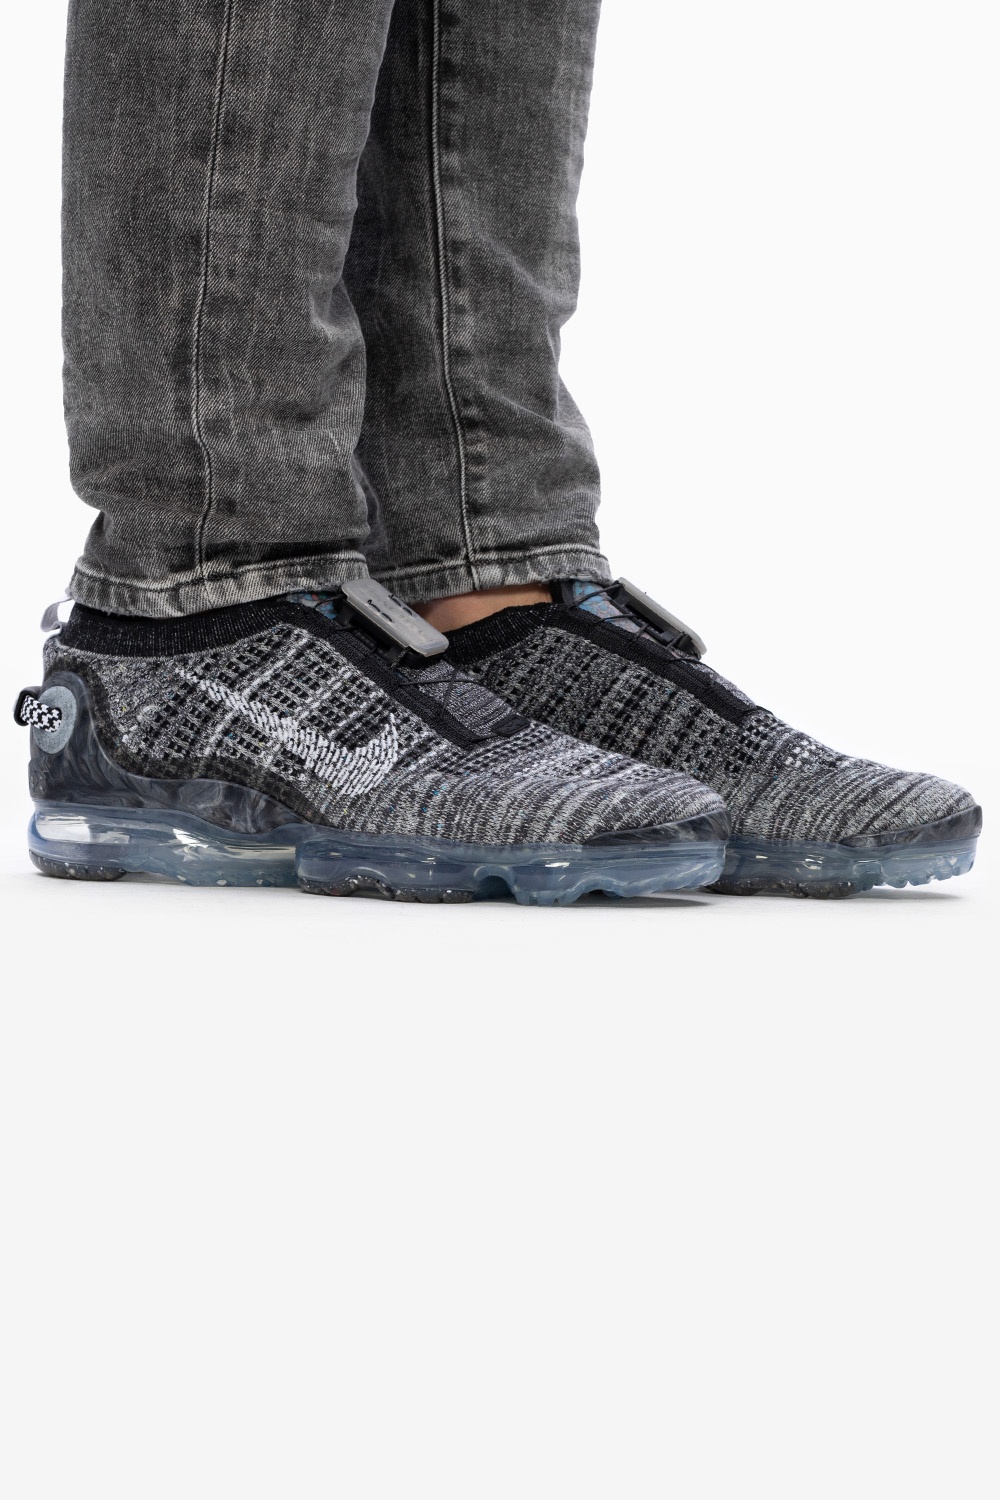 nike vapormax with jeans